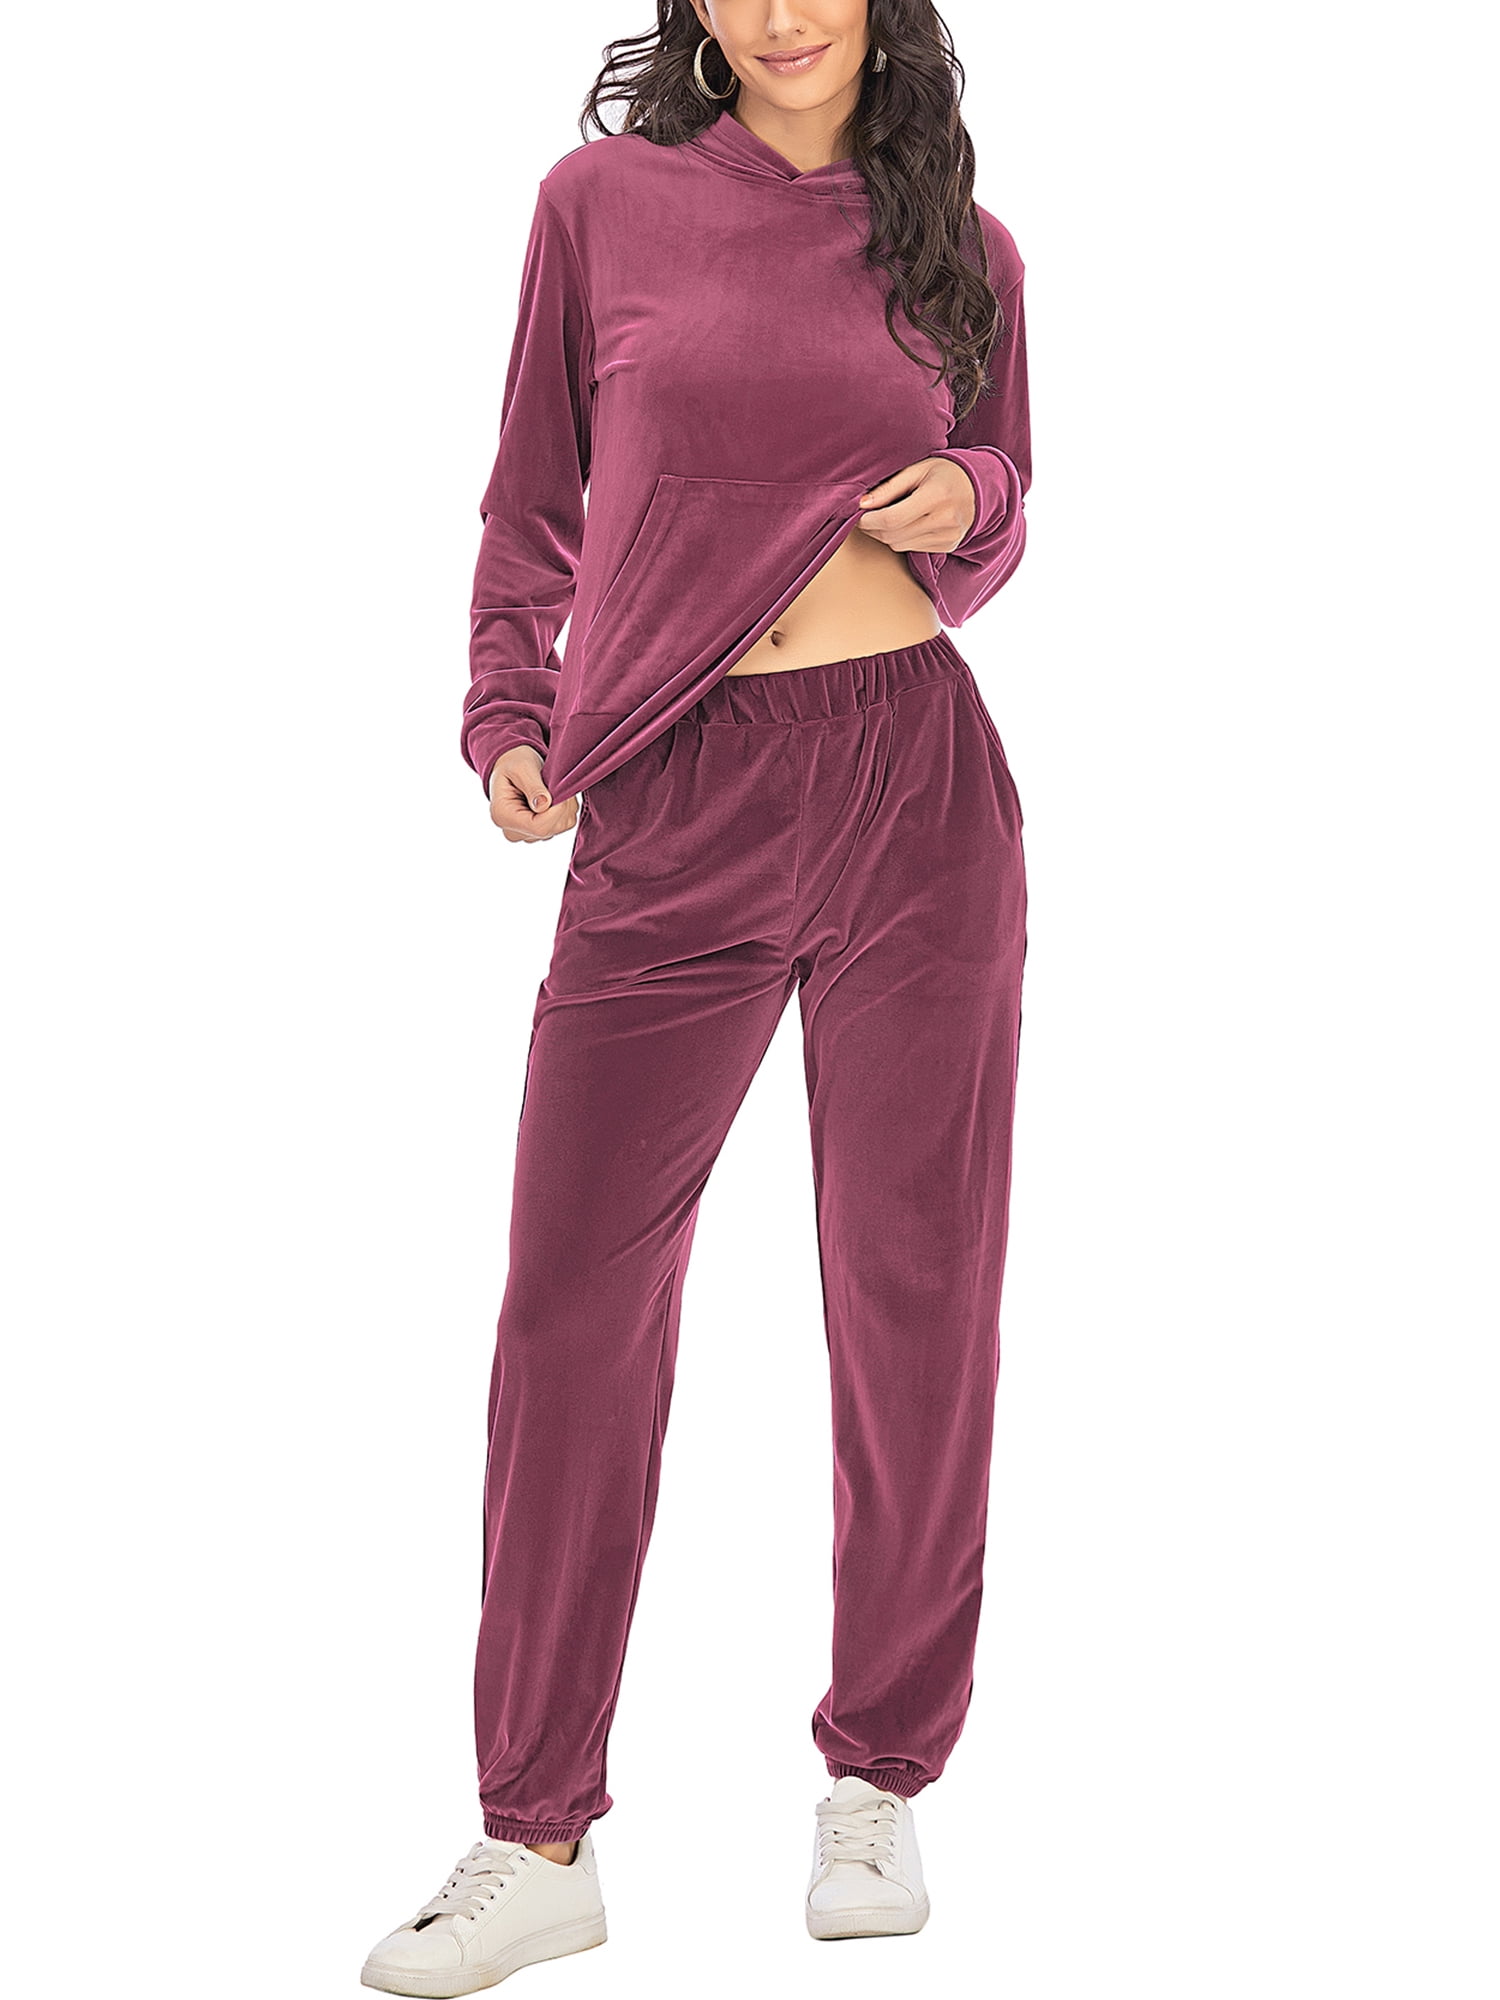 2 Piece Velour Sweatsuits Track Suits For Women Long Sleeve Hoodie and  Pants Sets Soft Velvet Tracksuit Loose Sweatshirts Velour Yoga Jogger with